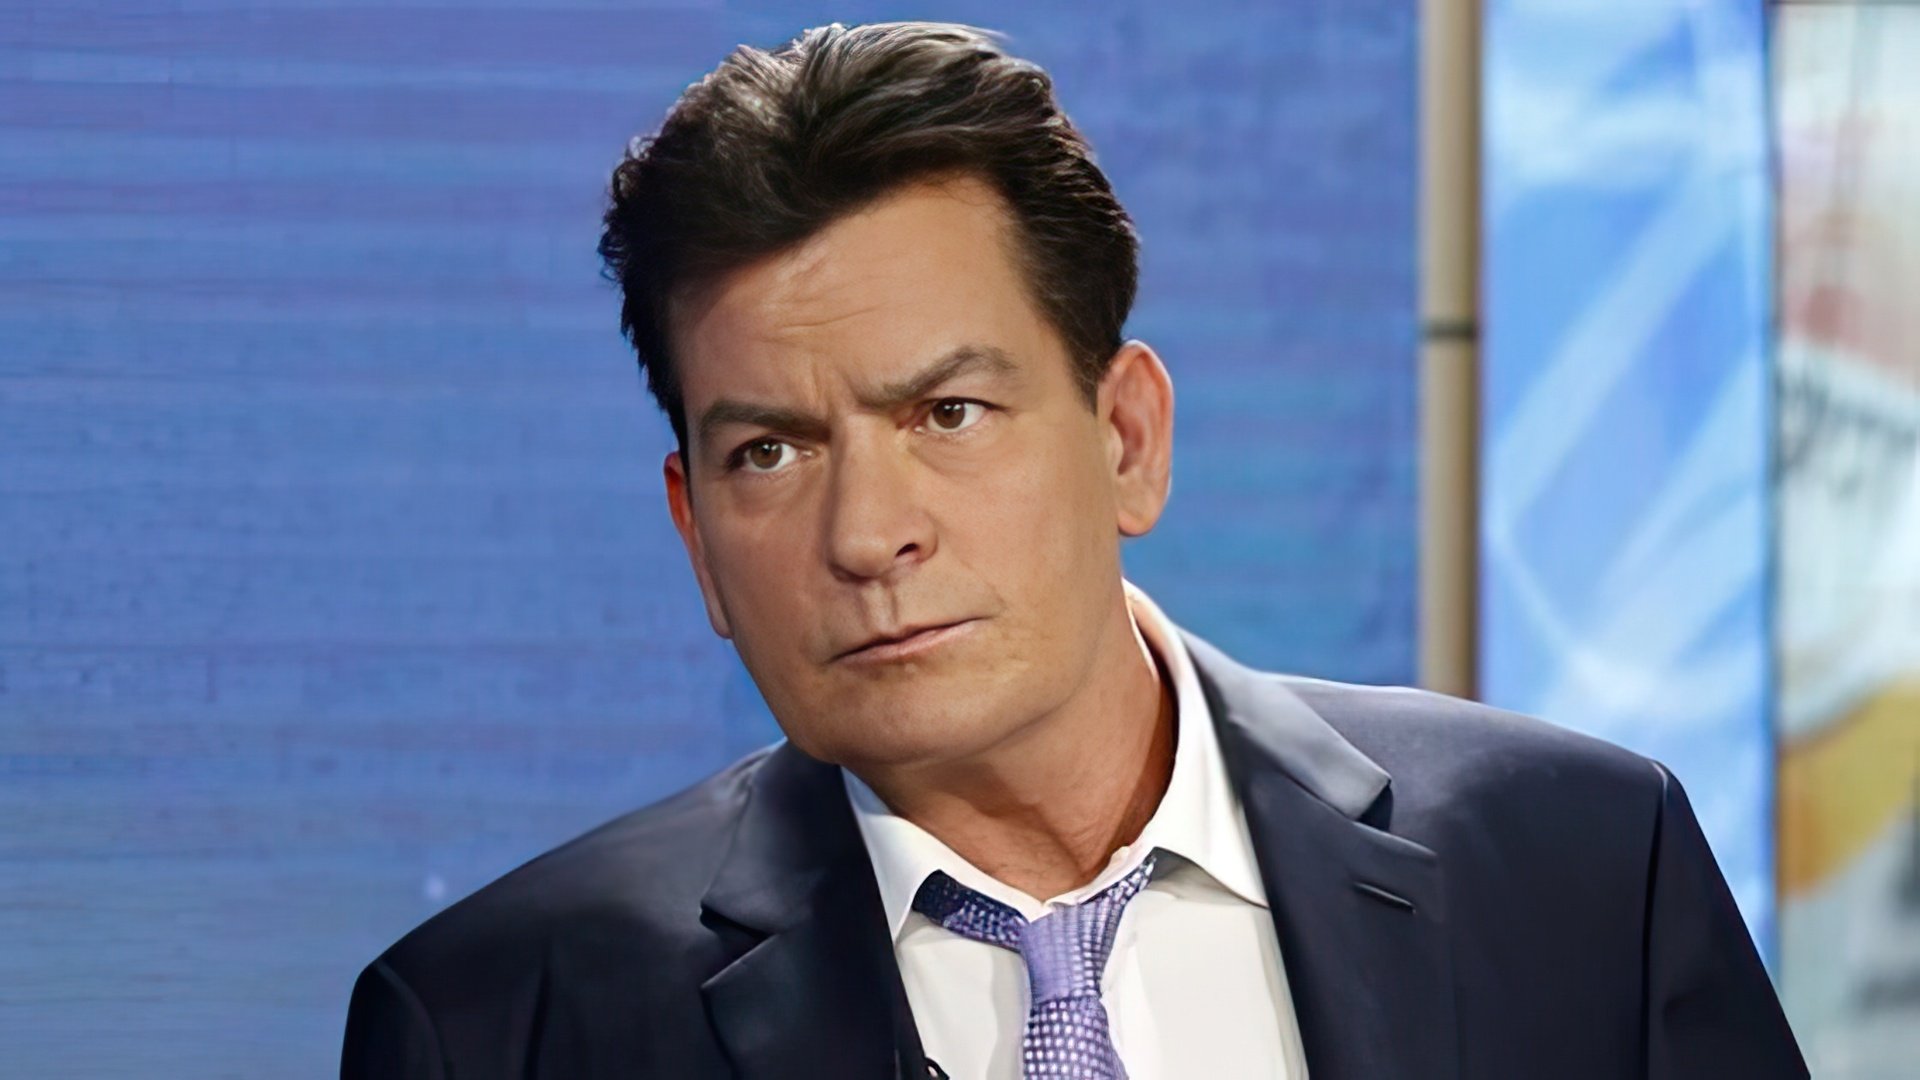 Pictured: Charlie Sheen